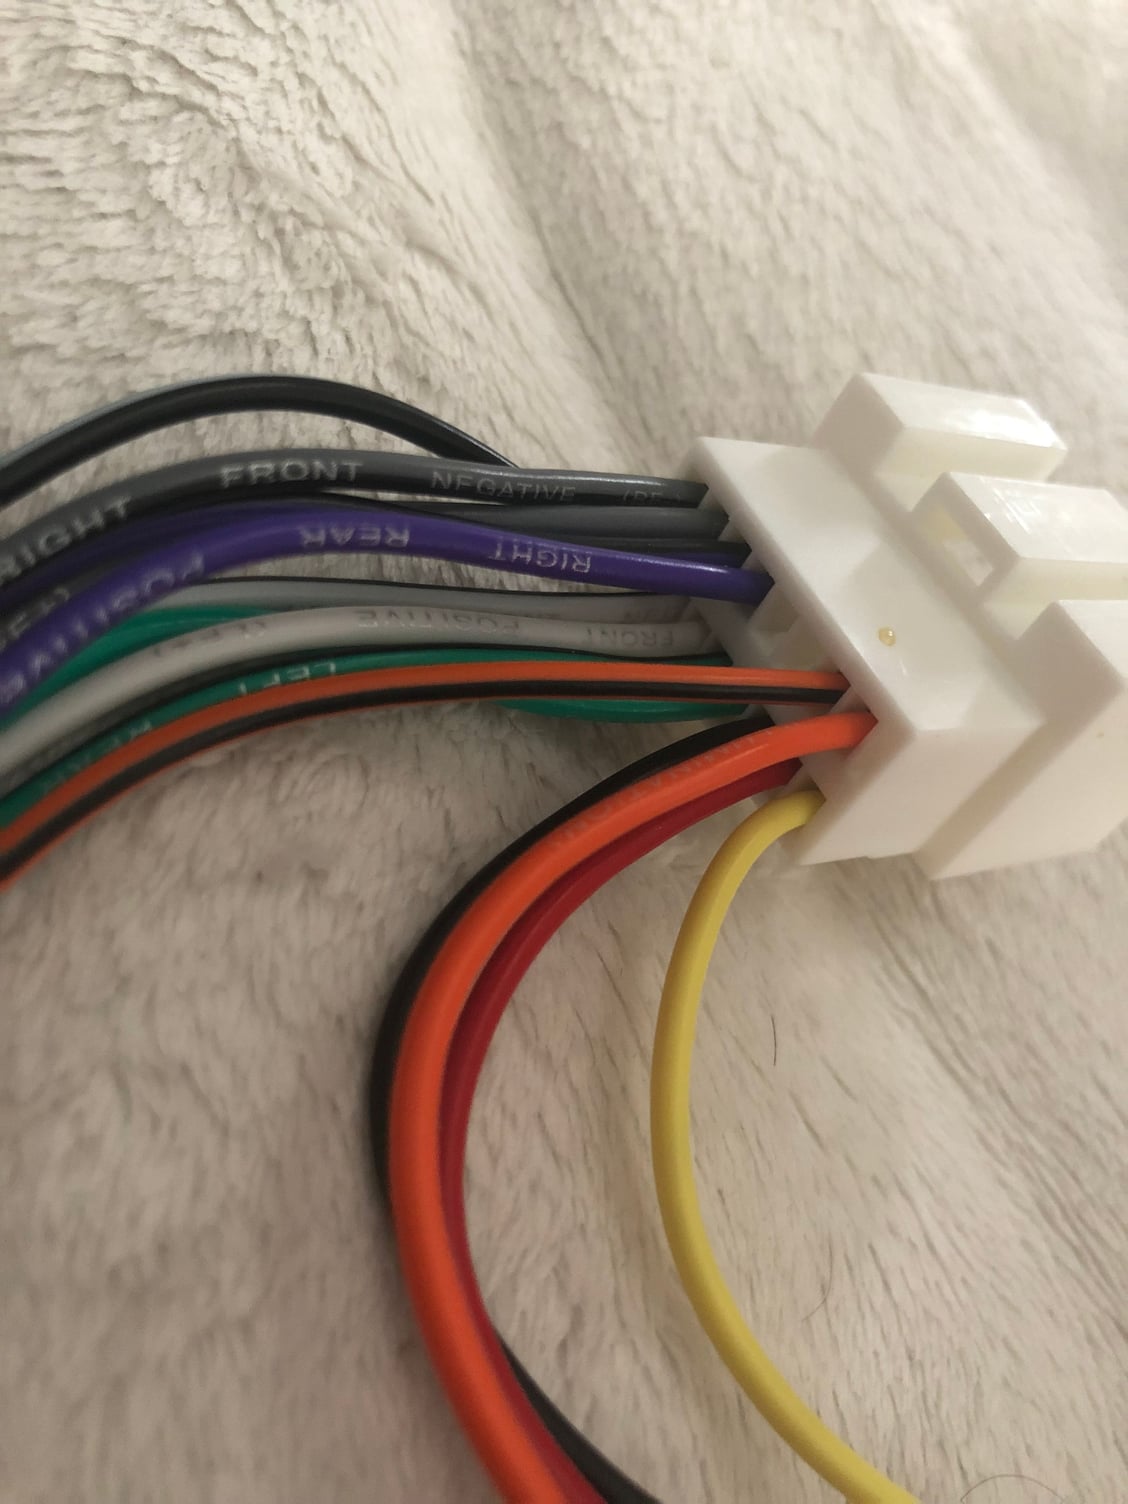 Need Help Wiring Harness - Ranger-Forums - The Ultimate Ford Ranger